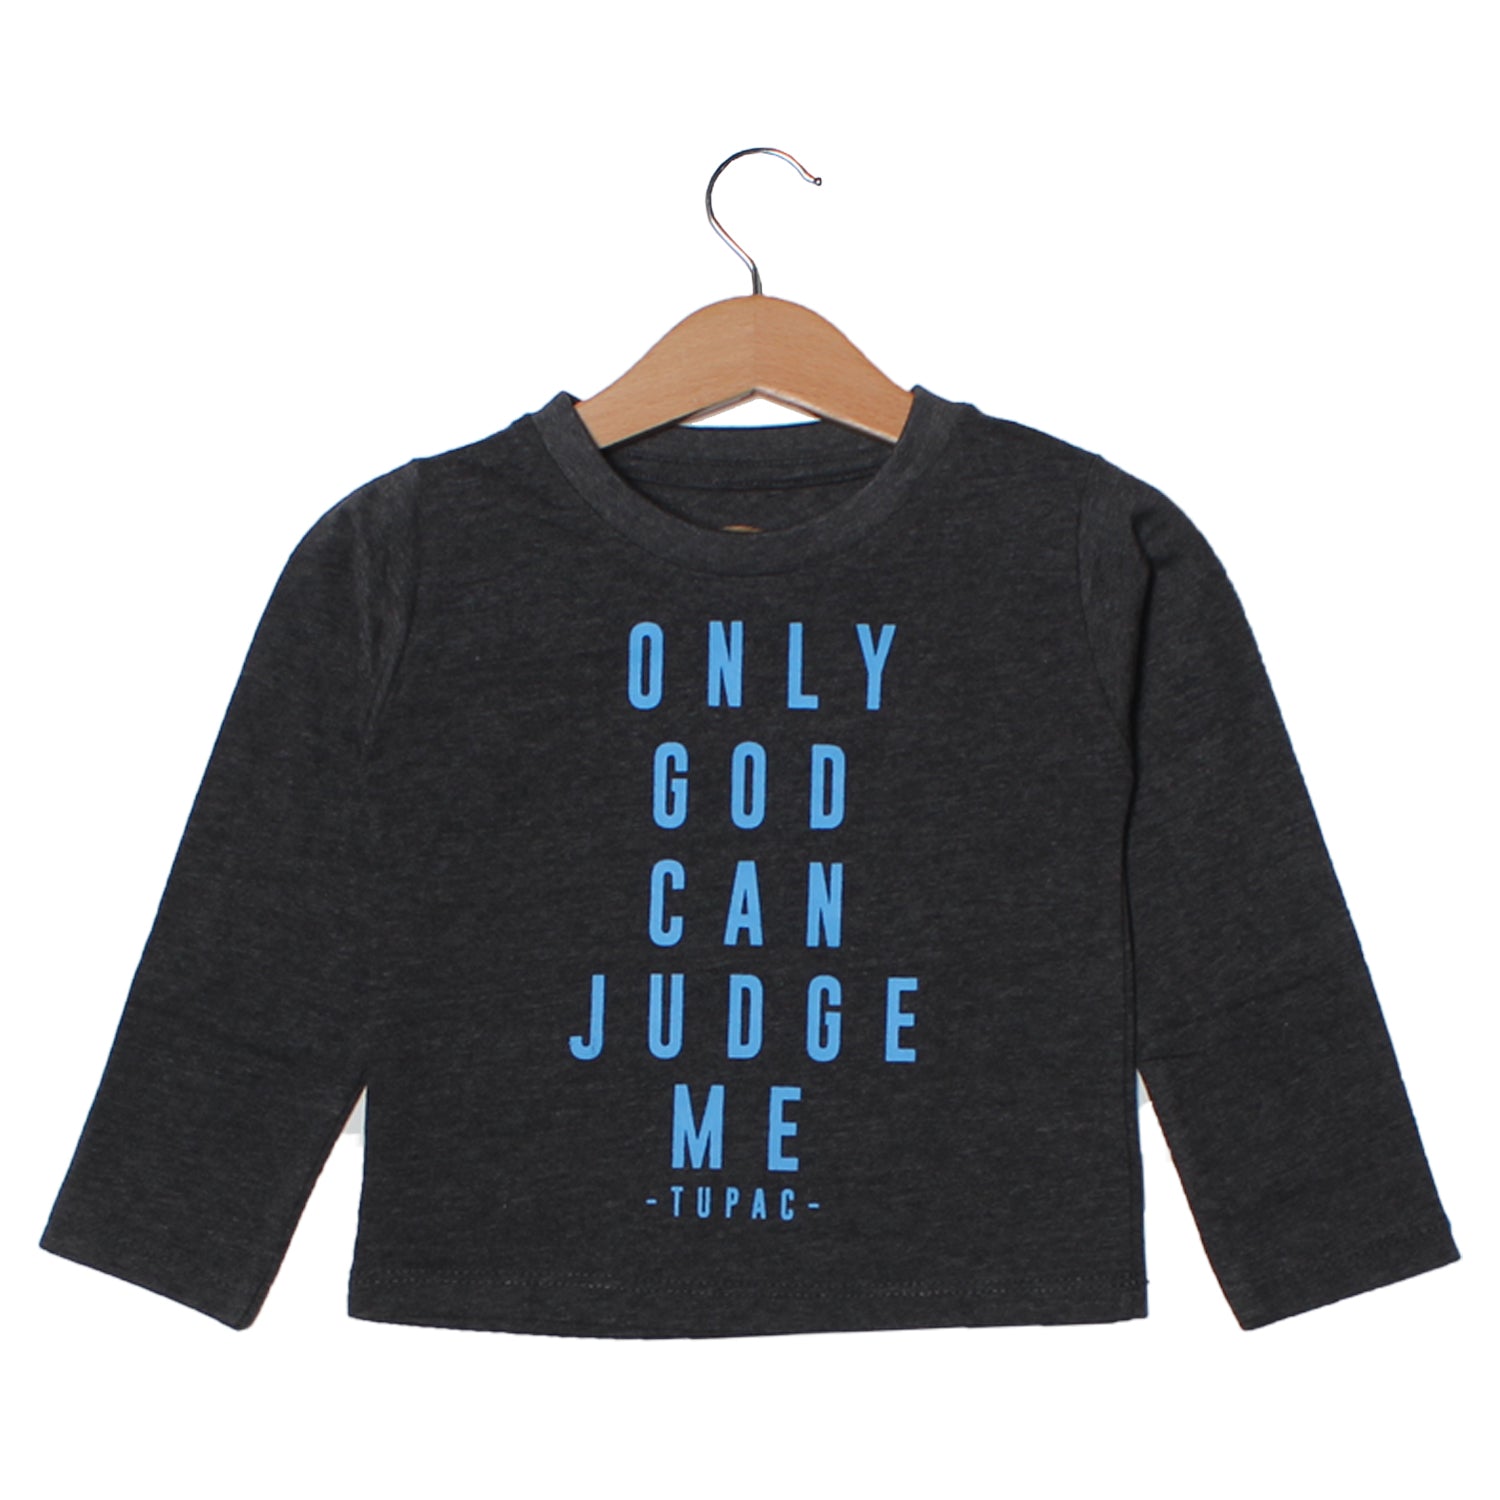 ONLY GOD CAN JUDGE ME FULL SLEEVE T-SHIRT